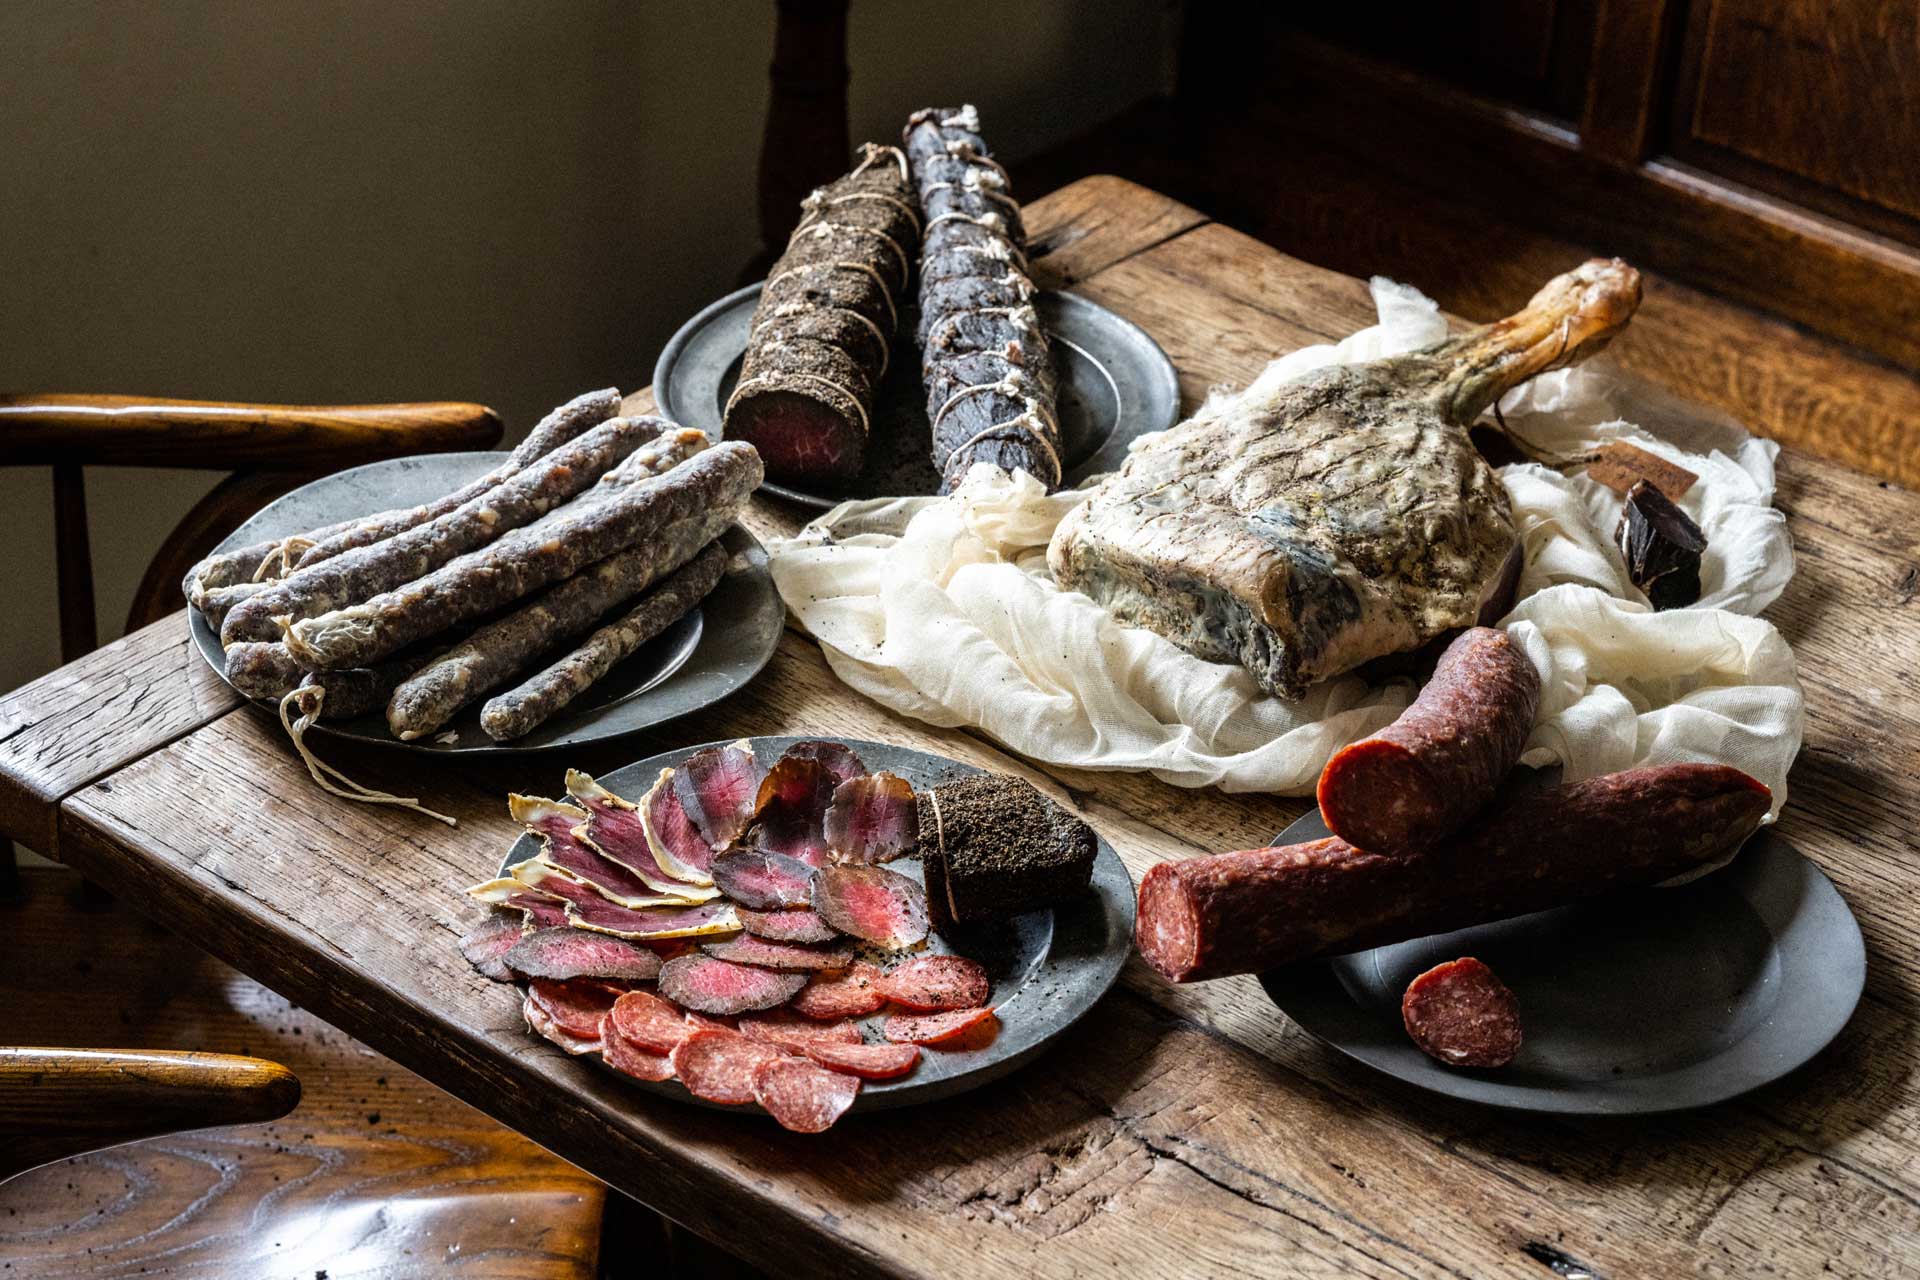 Birch Farm, Woolsery, Provides a British take on Continental Charcuterie